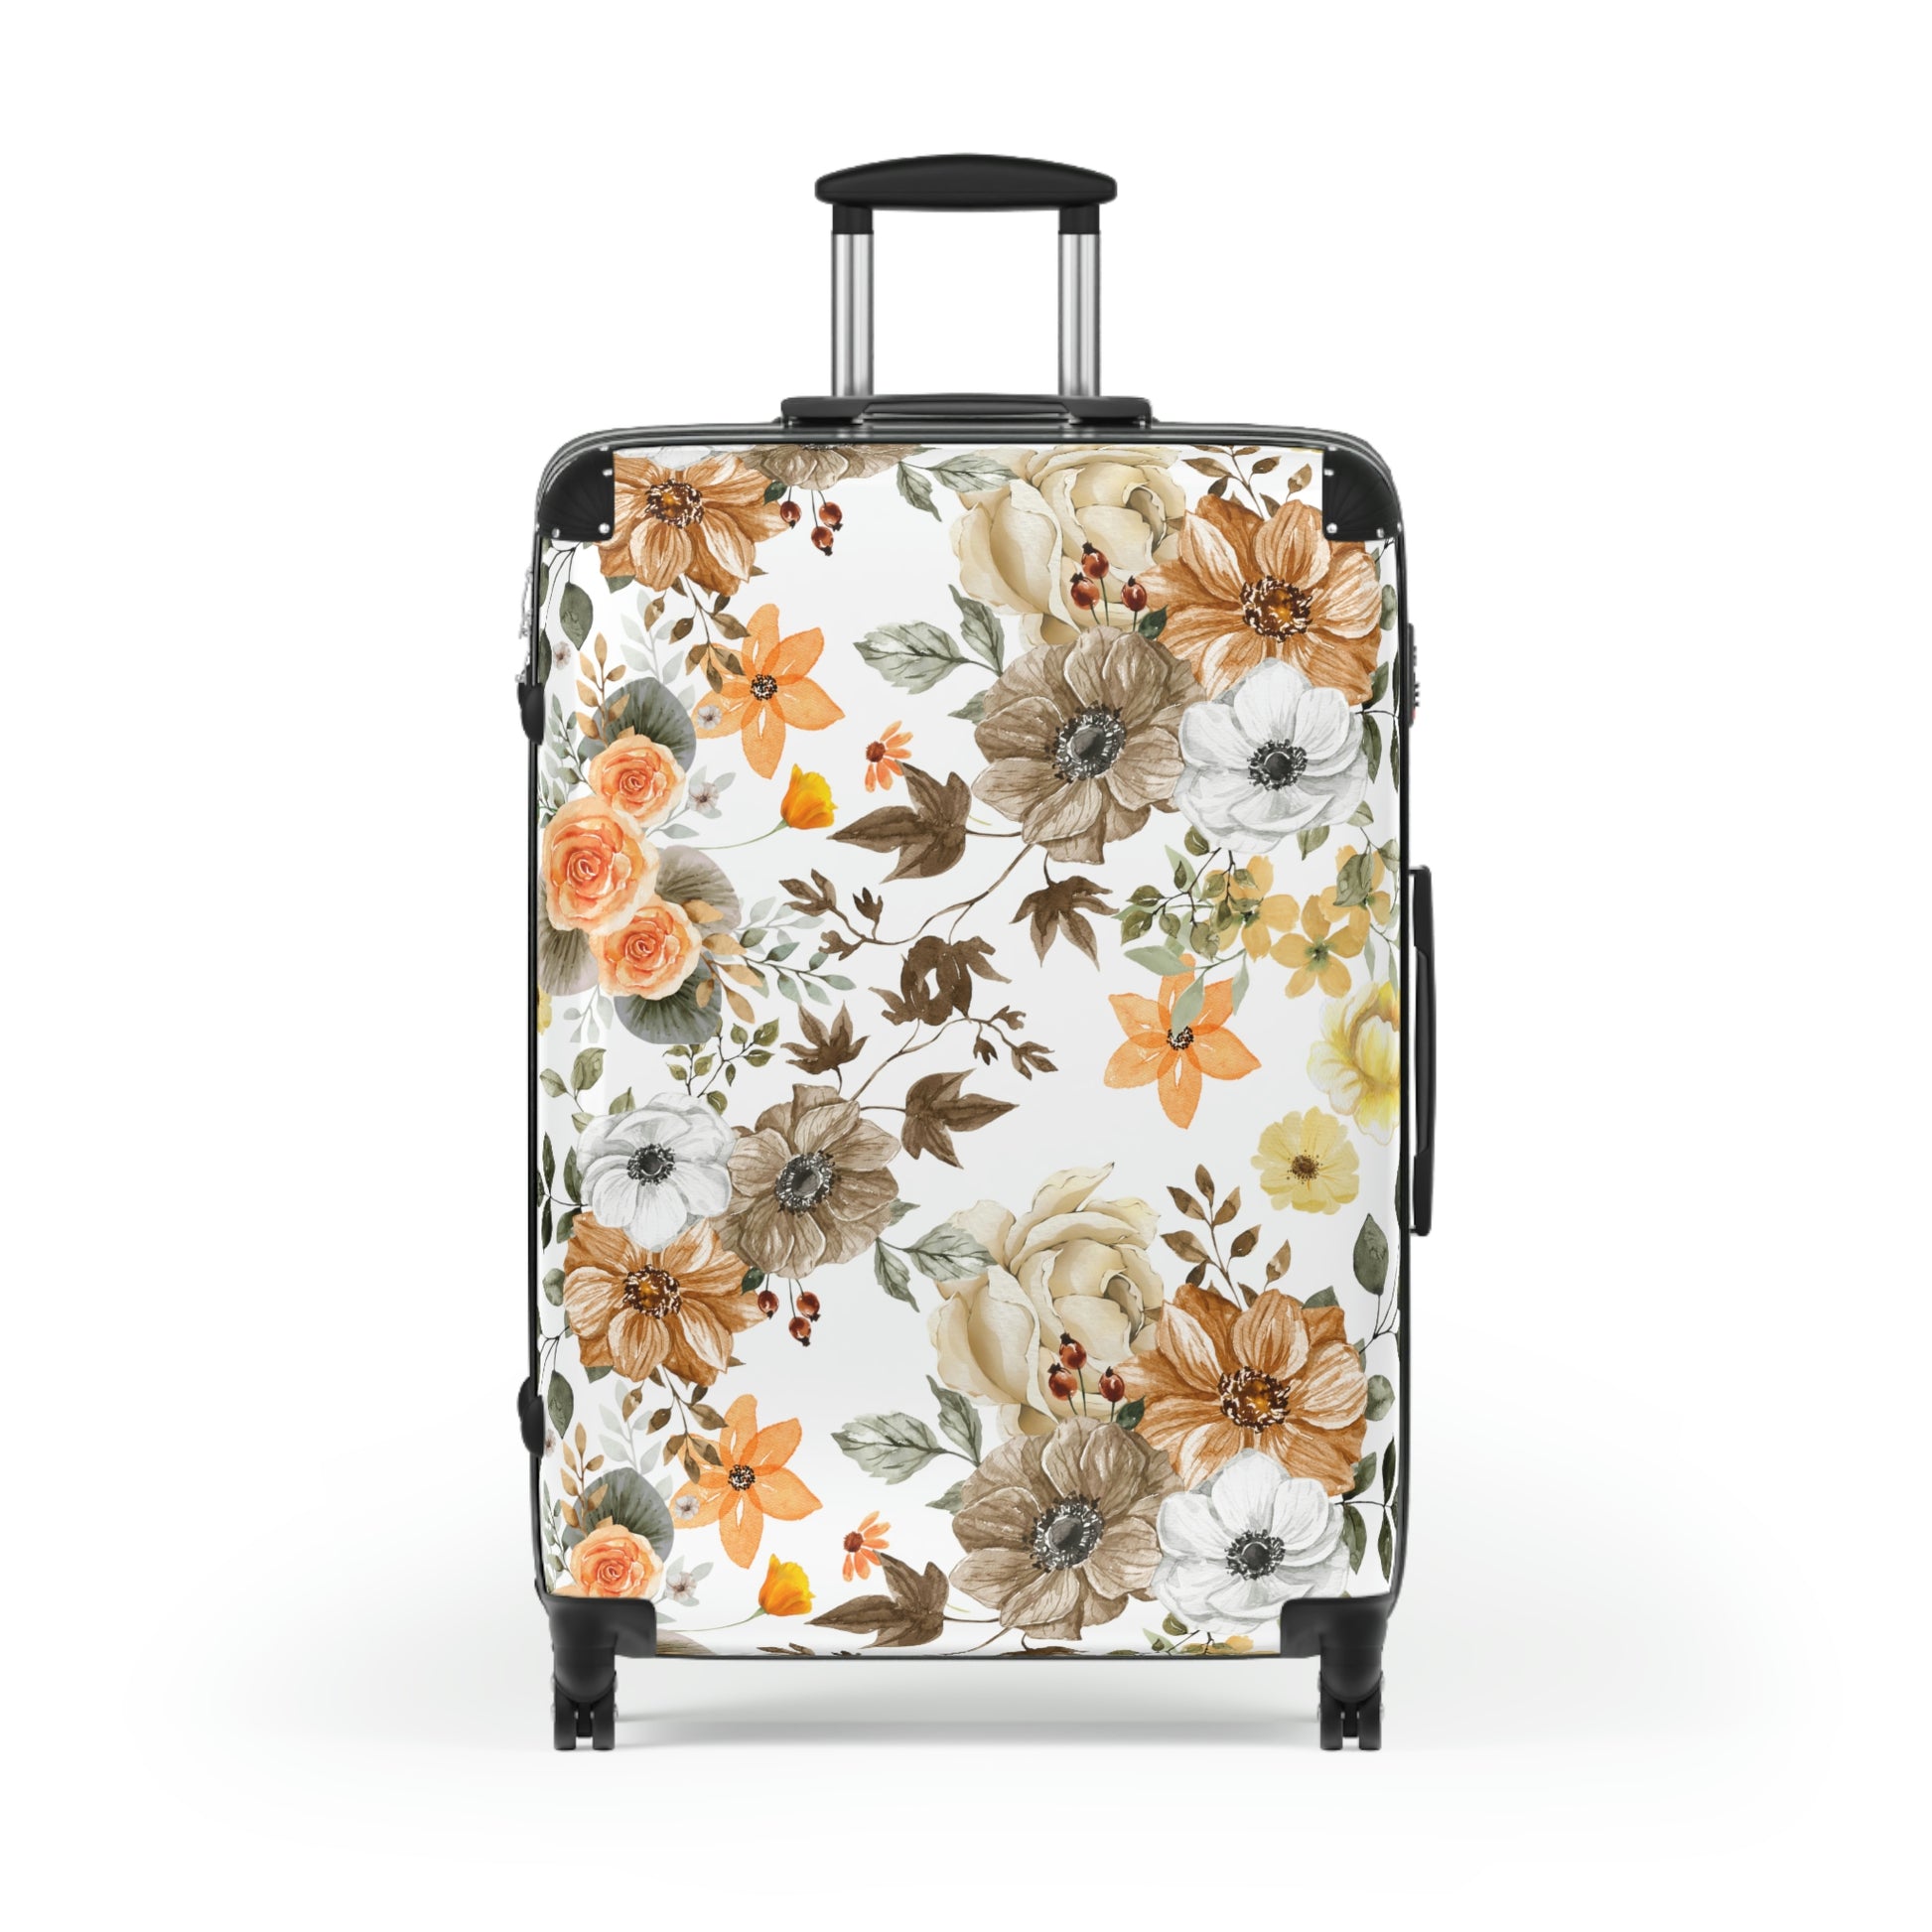 brown, yellow and orange cabin suitcase with wheels for spring or summer